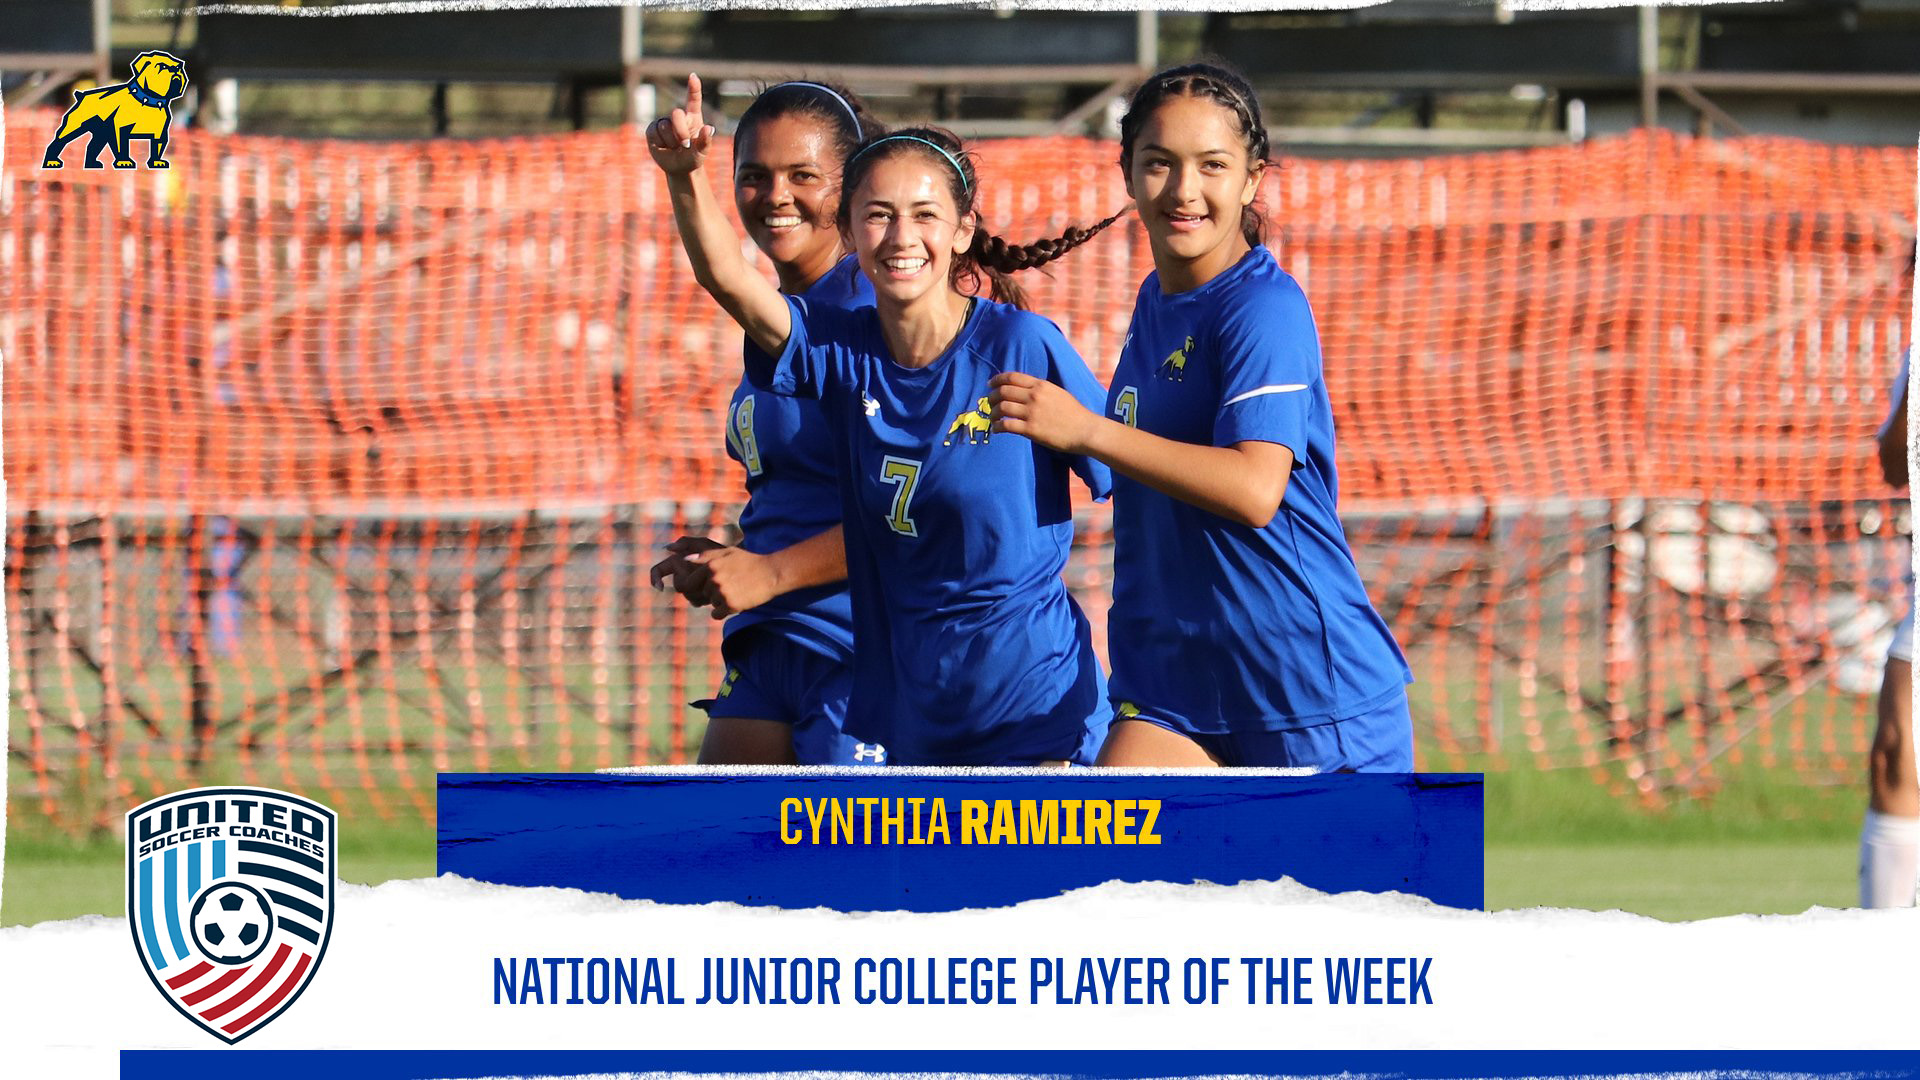 Cynthia Ramirez Named as National Junior College Player of the Week